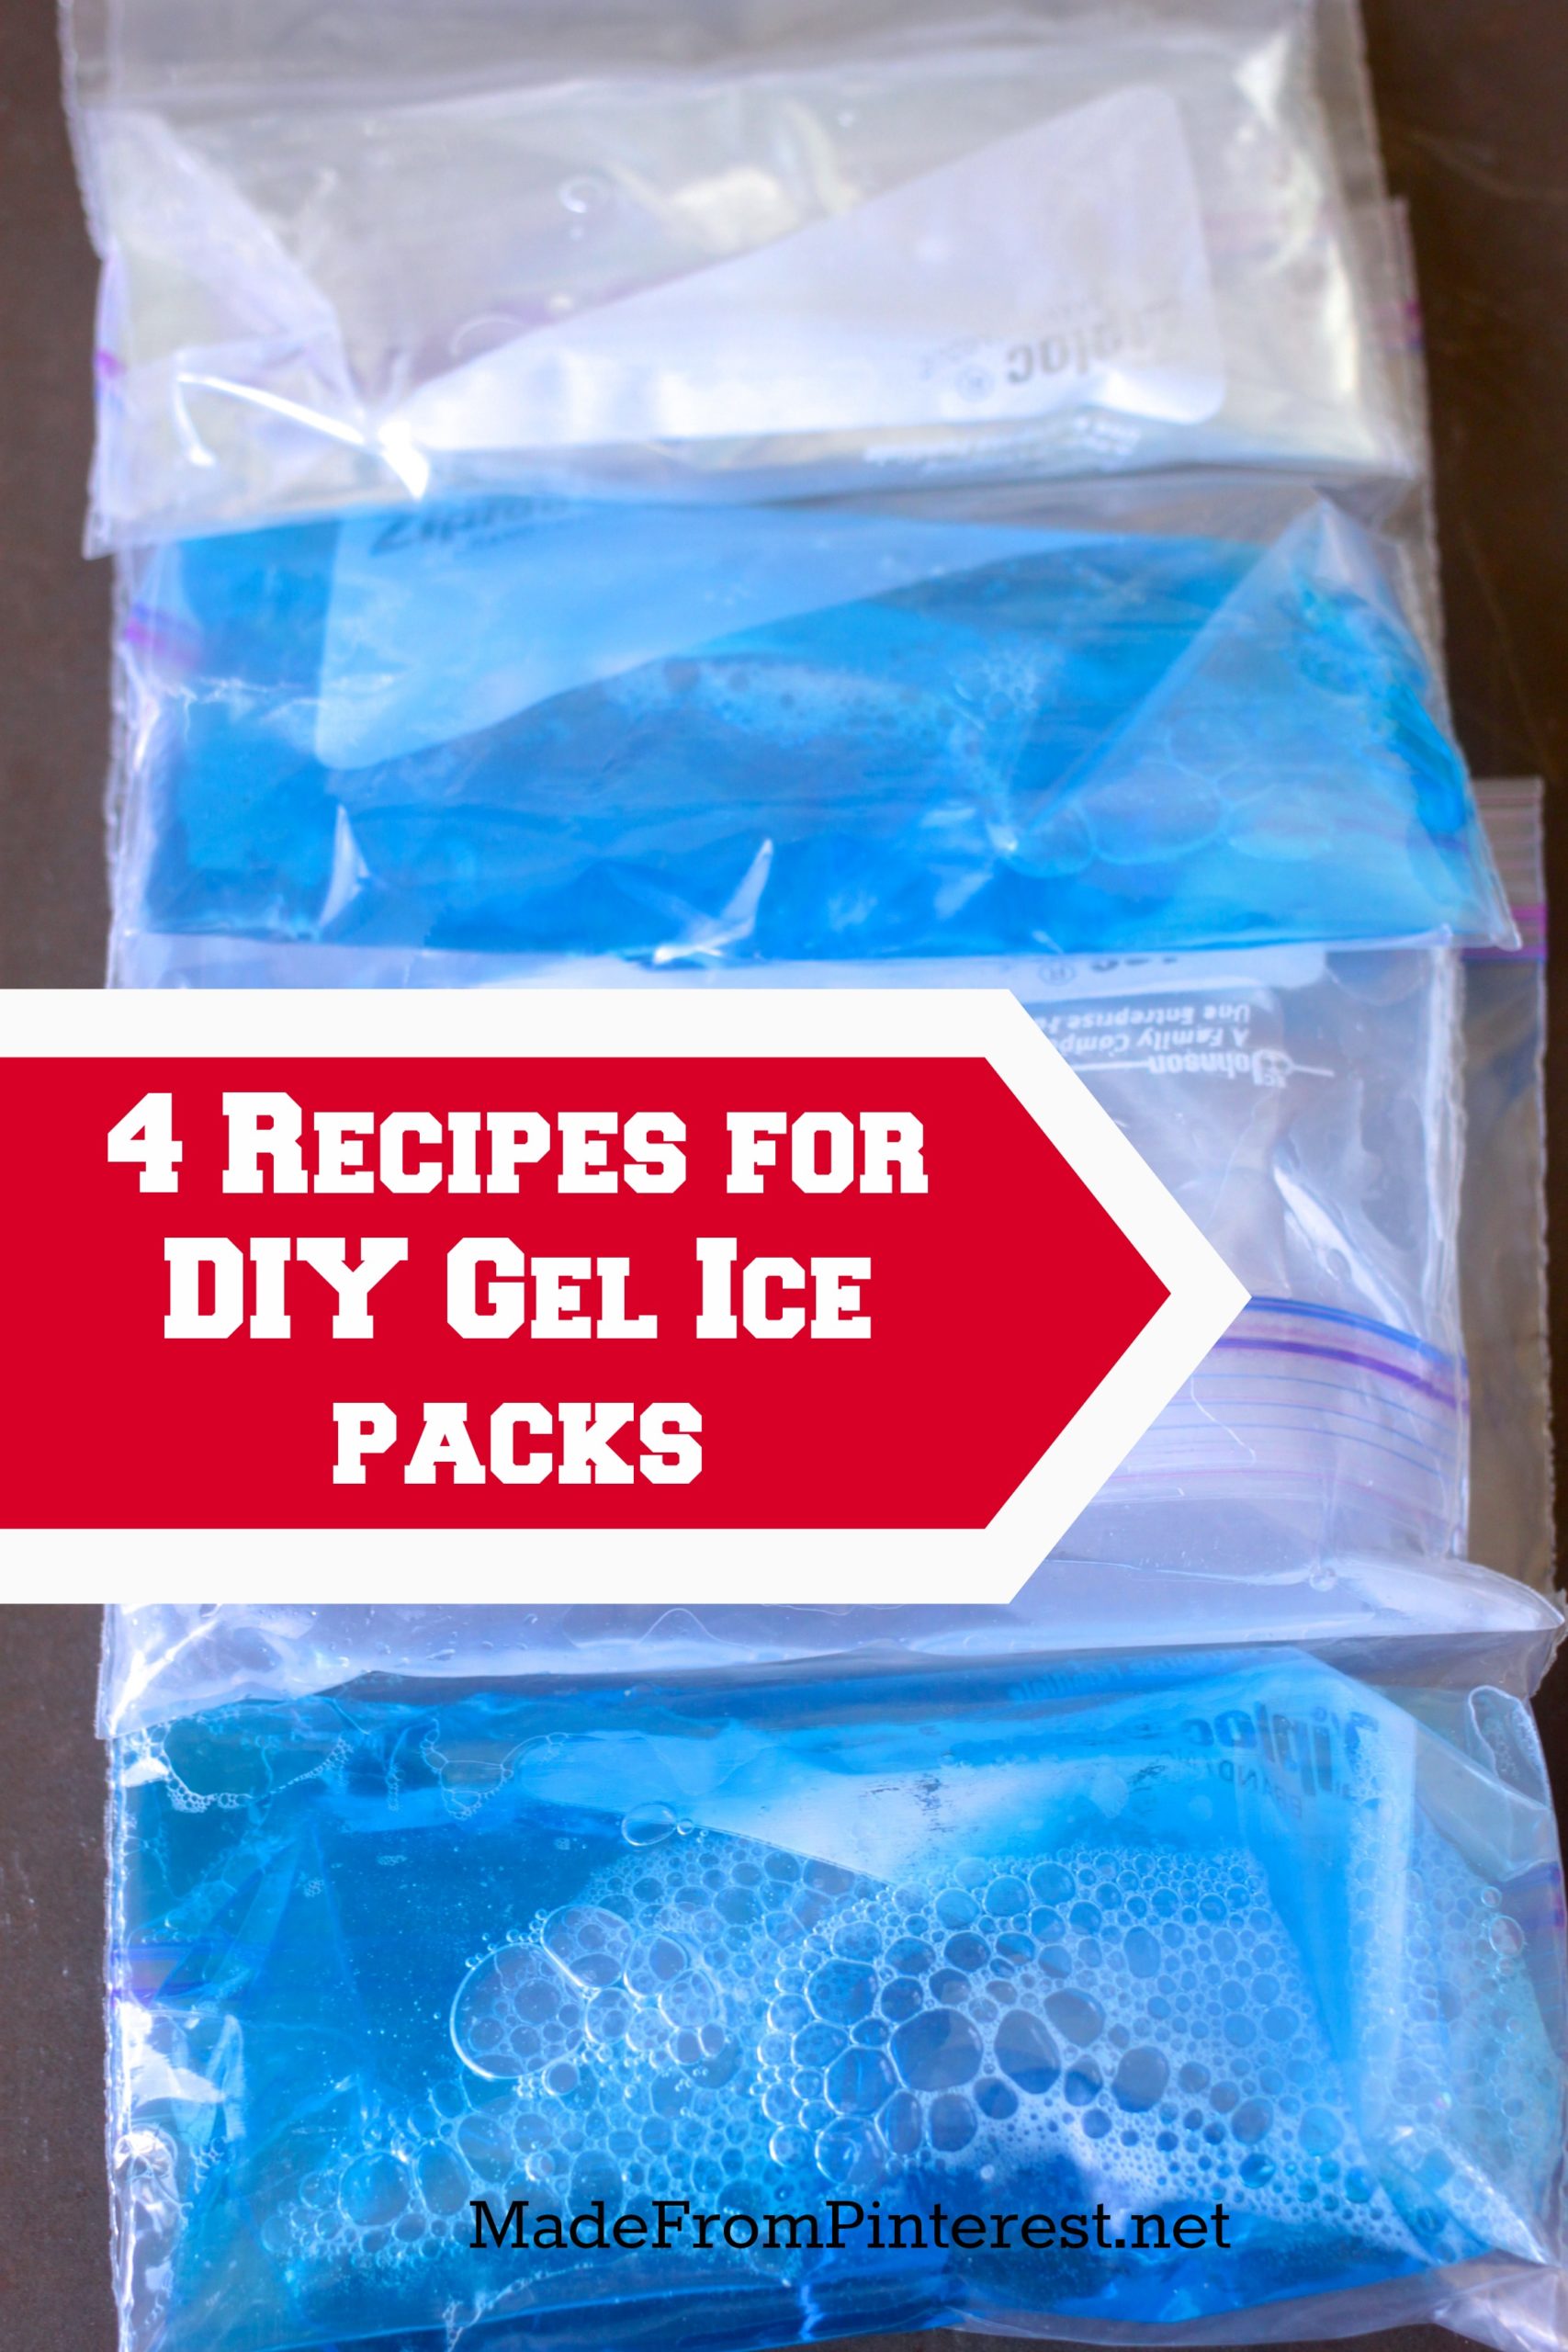 https://www.thisgrandmaisfun.com/wp-content/uploads/2014/04/DIY-Gel-Ice-Packs-Recommended-by-physical-therapists-for-therapy-and-sports-injuries.-Easy-and-inexpensive-to-make-with-ingredients-you-have-at-home.-scaled.jpg